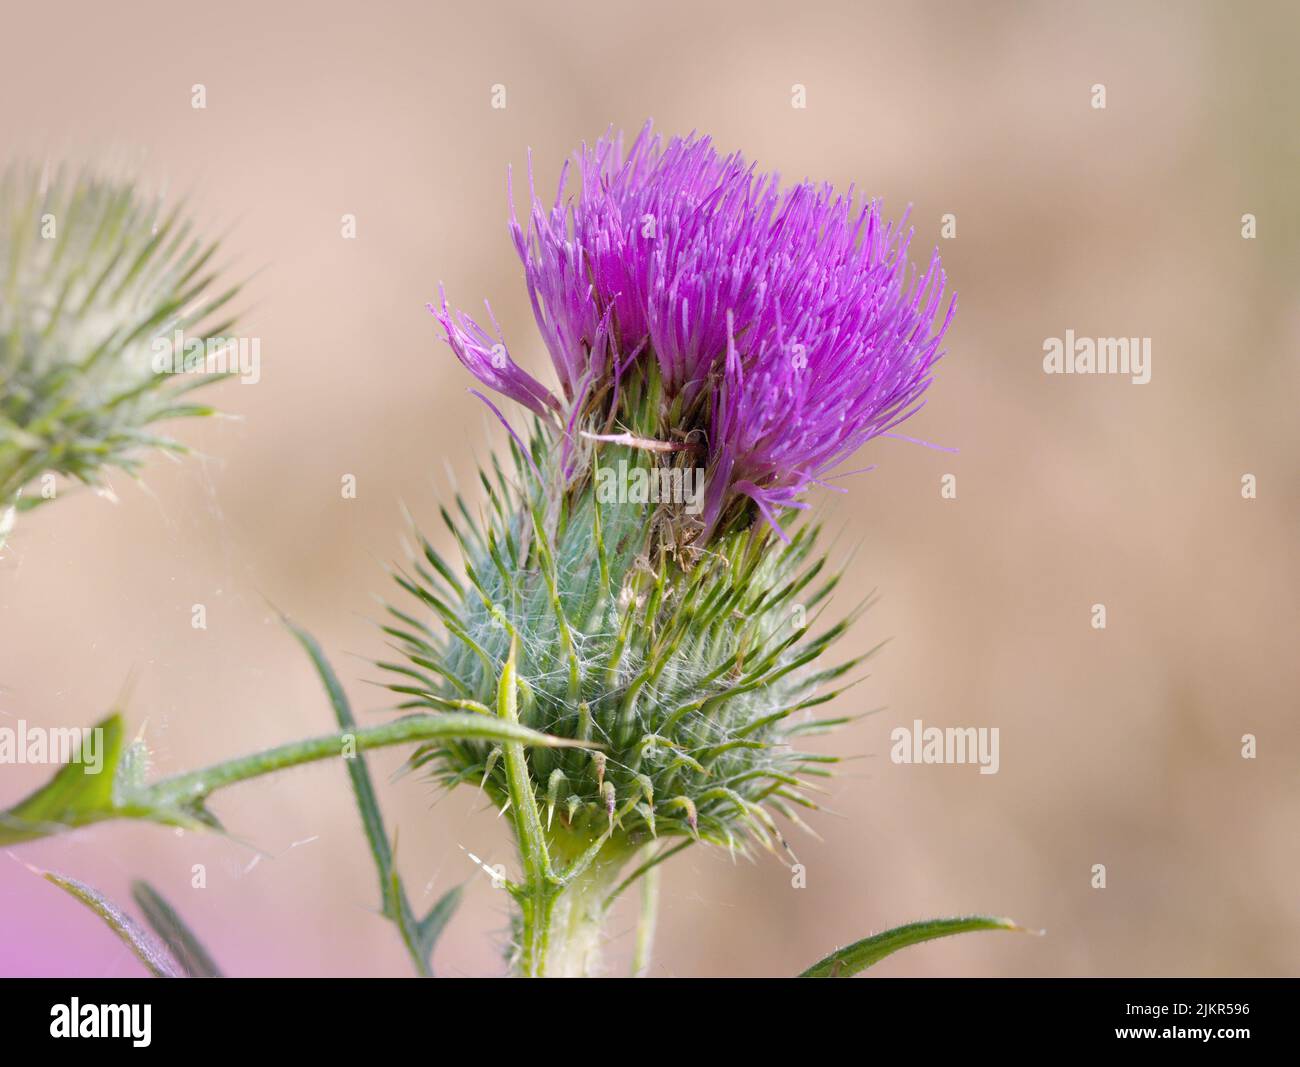 Macro photography of a thistle Stock Photo